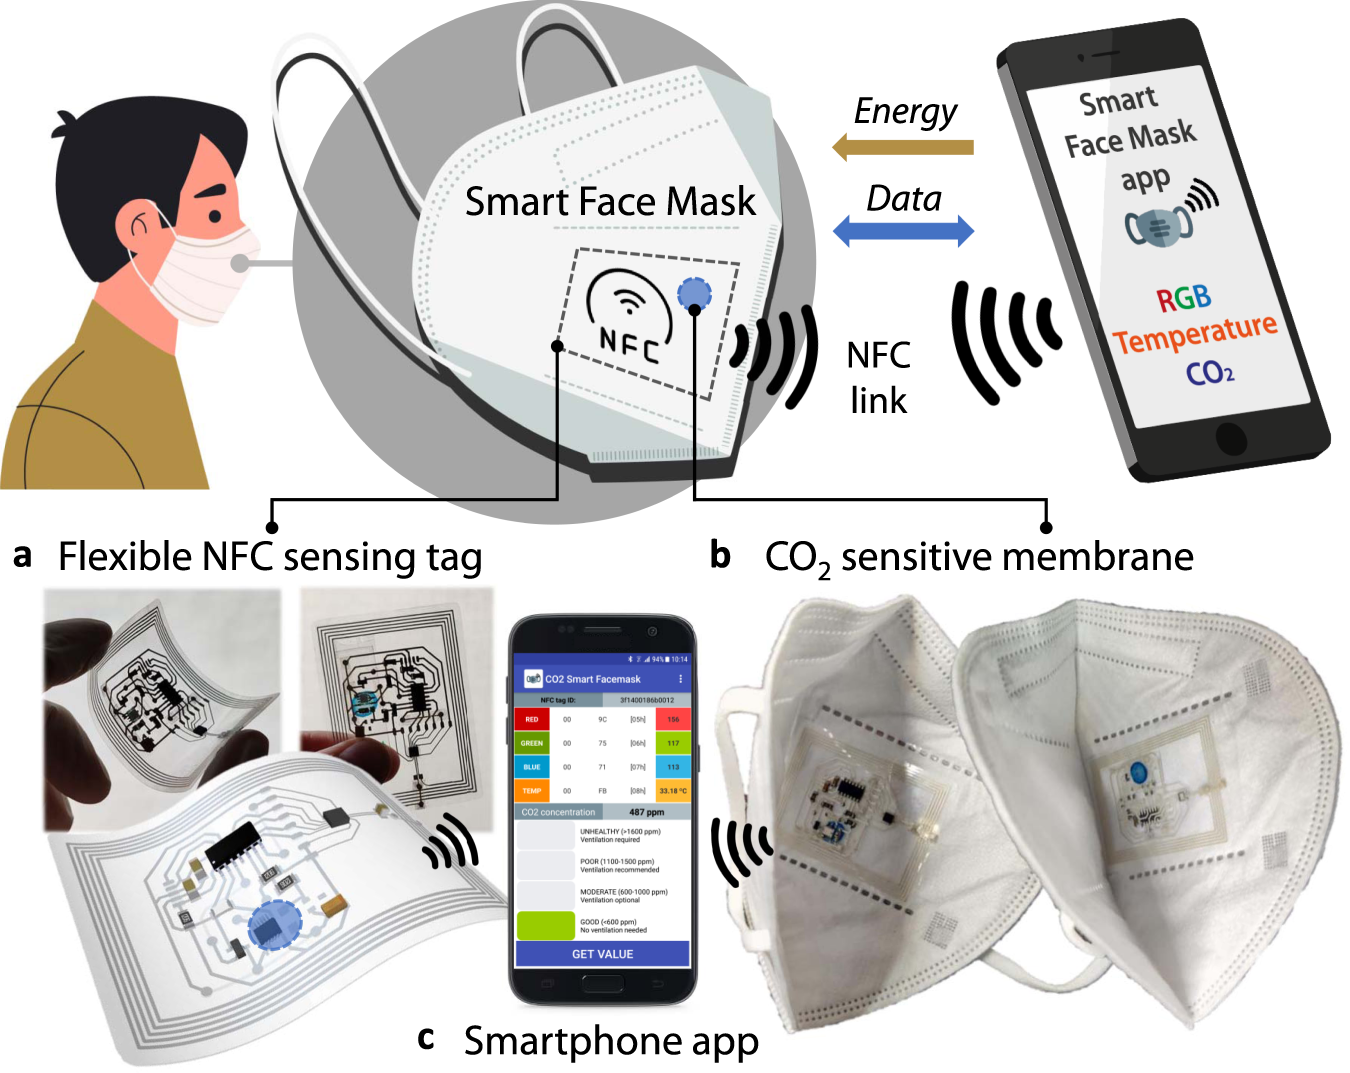 Smart facemask for wireless CO2 monitoring | Nature Communications